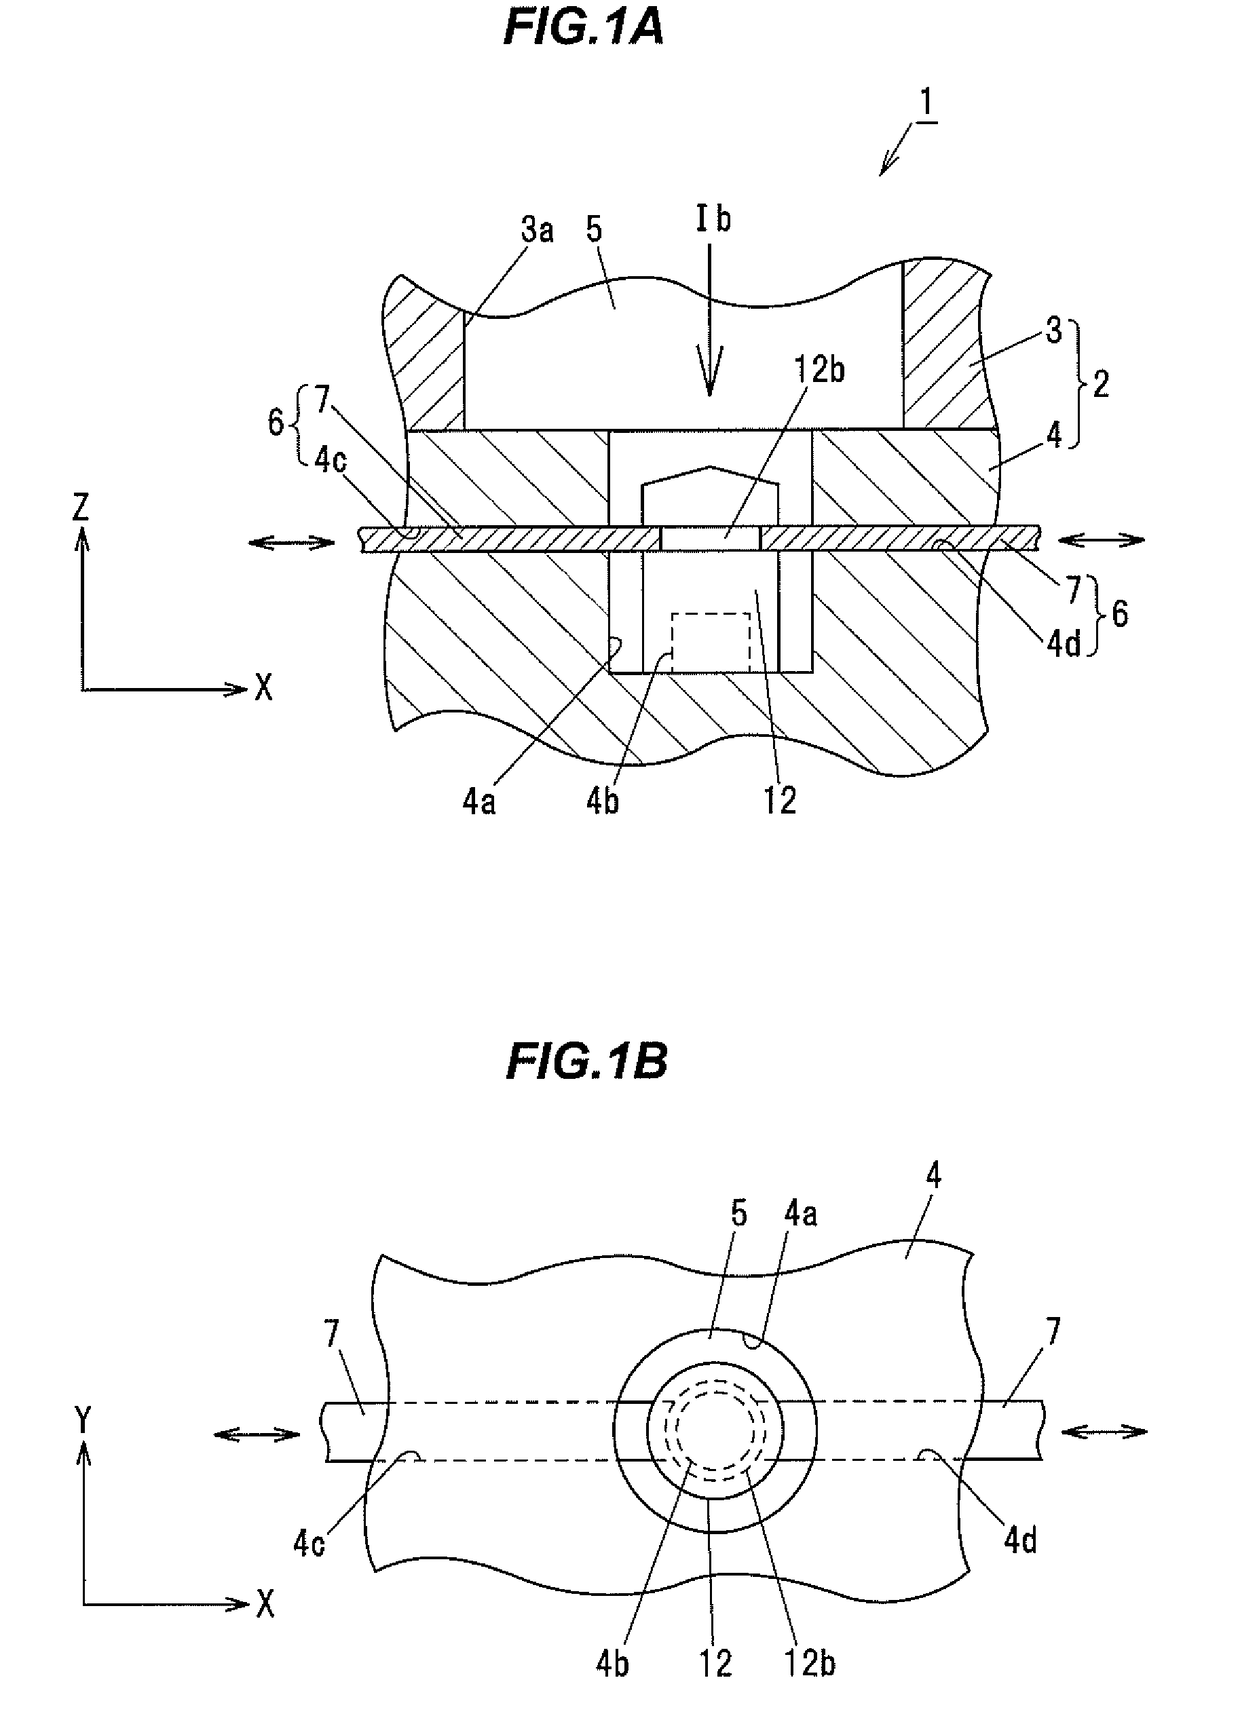 Mold assembly, method for producing insert molded article, and insert molded article